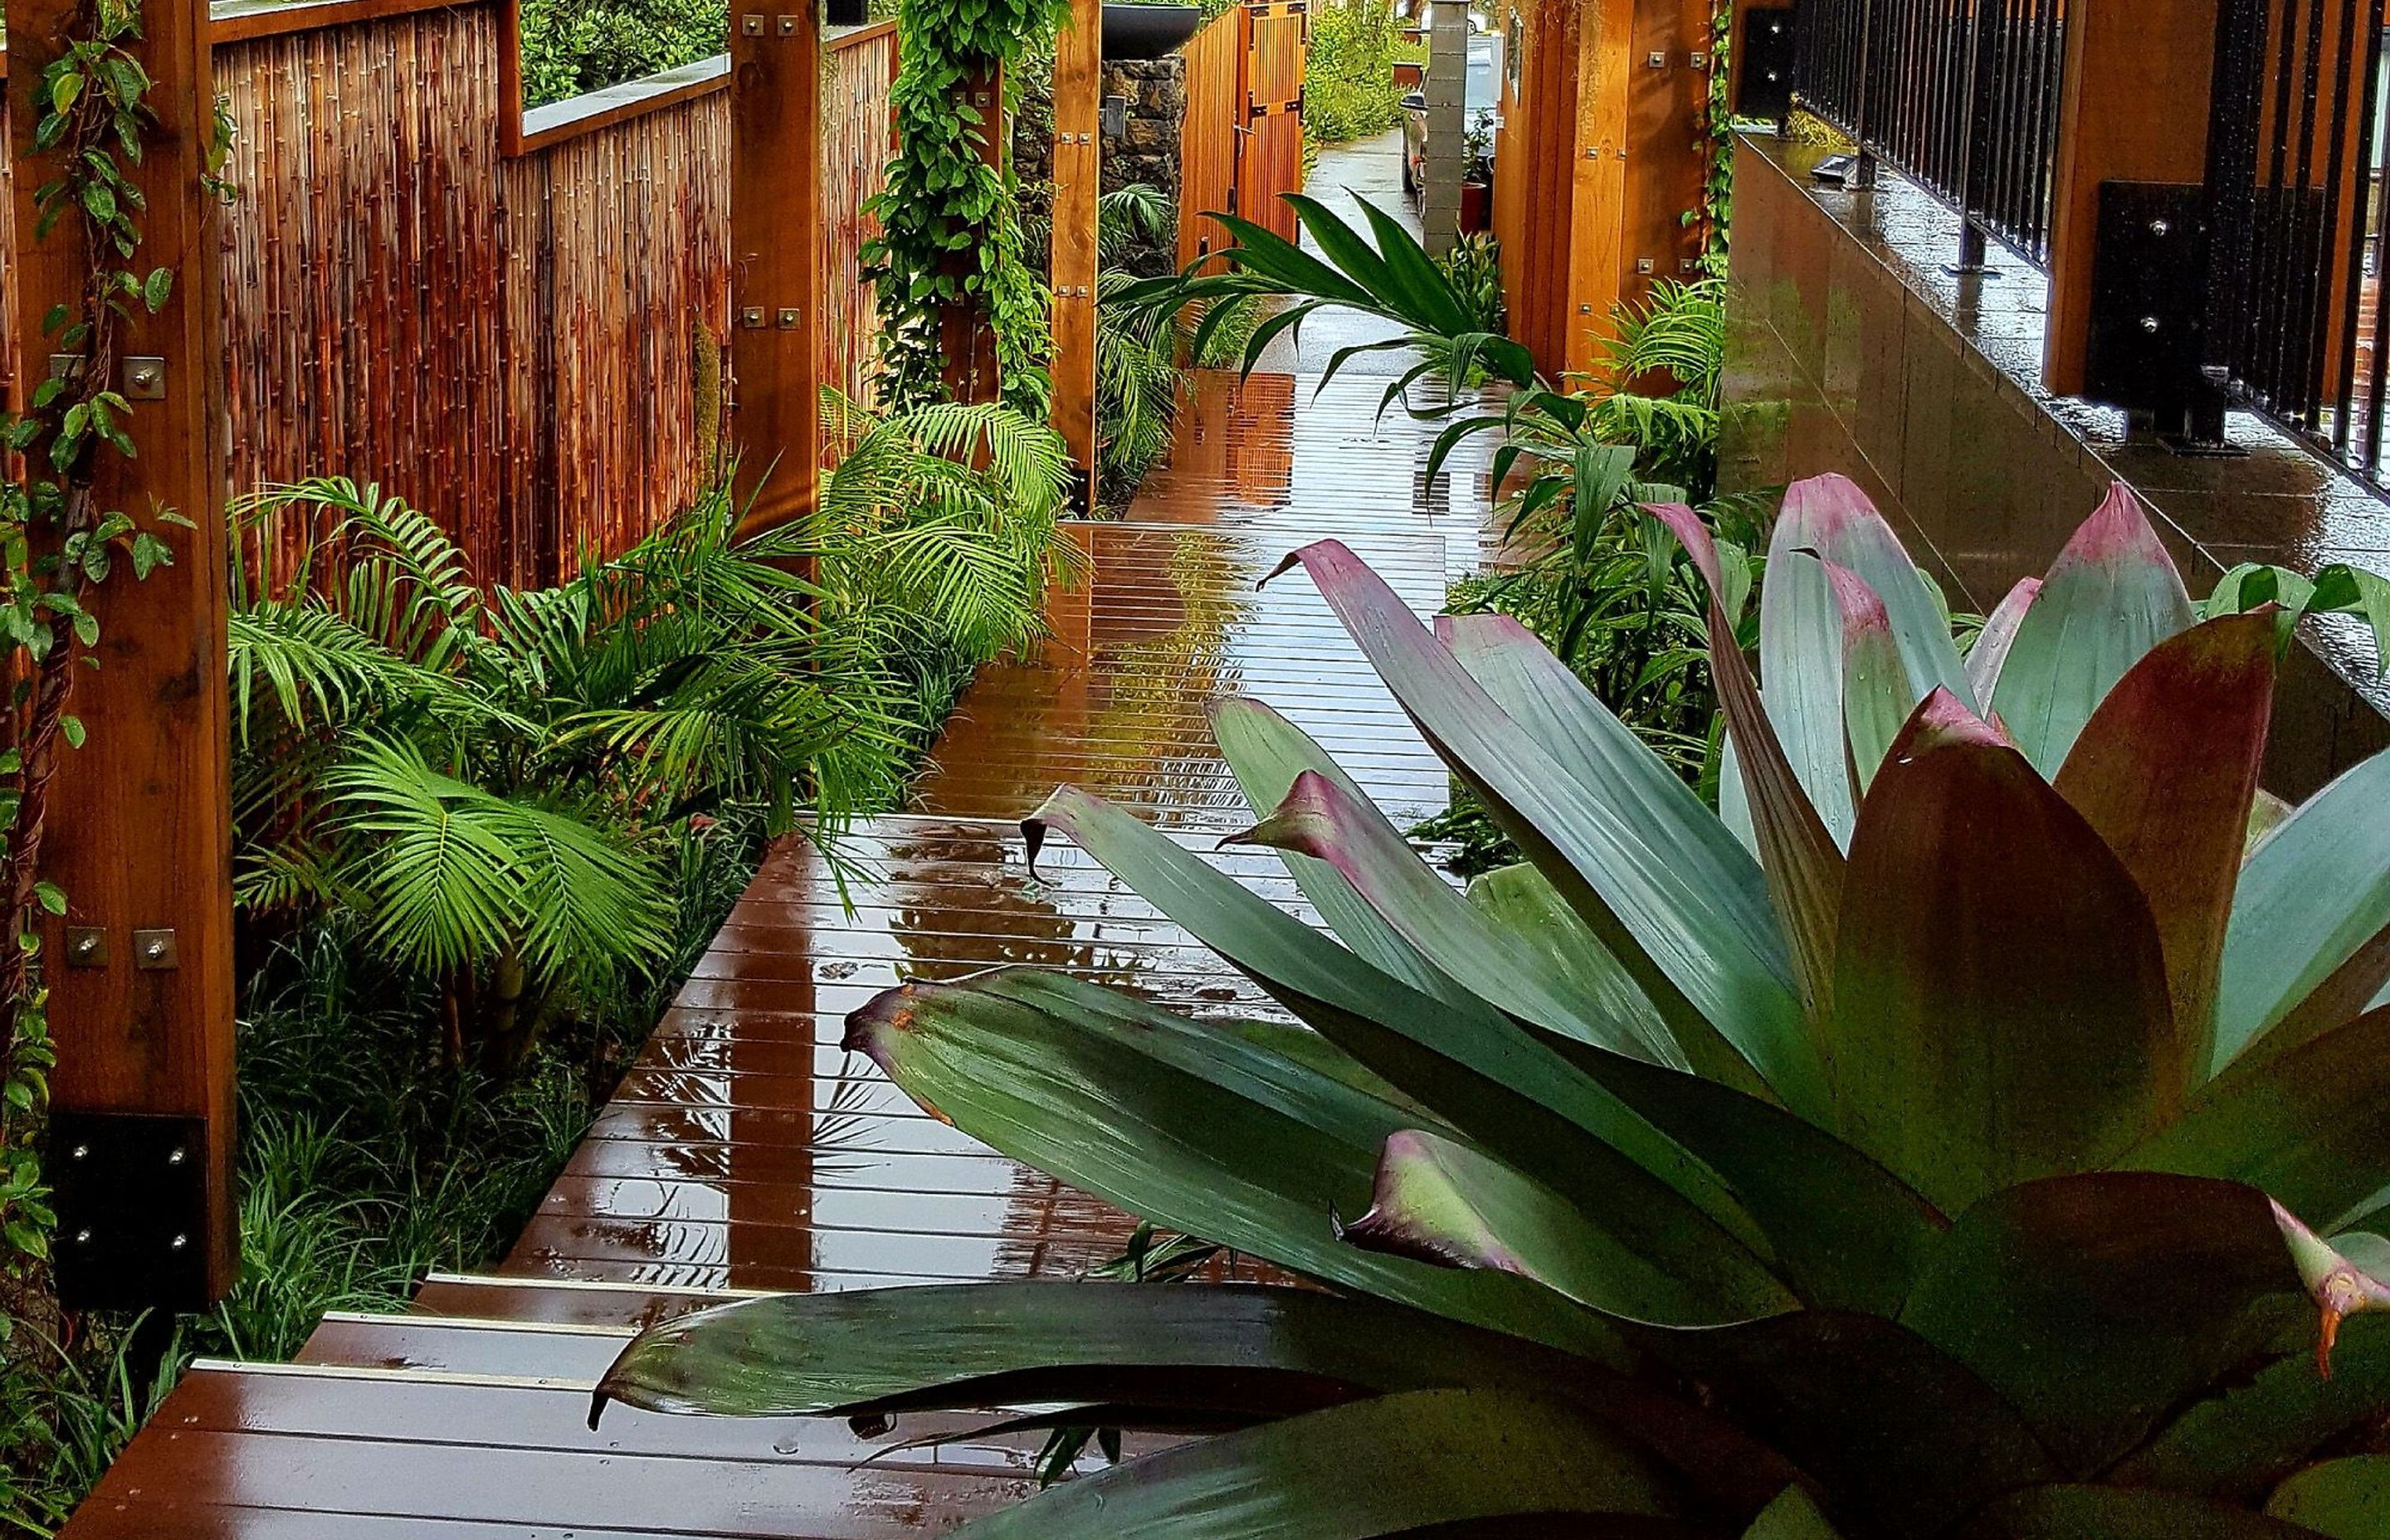 Sub-tropical planting thrives in the sheletered space between buildings